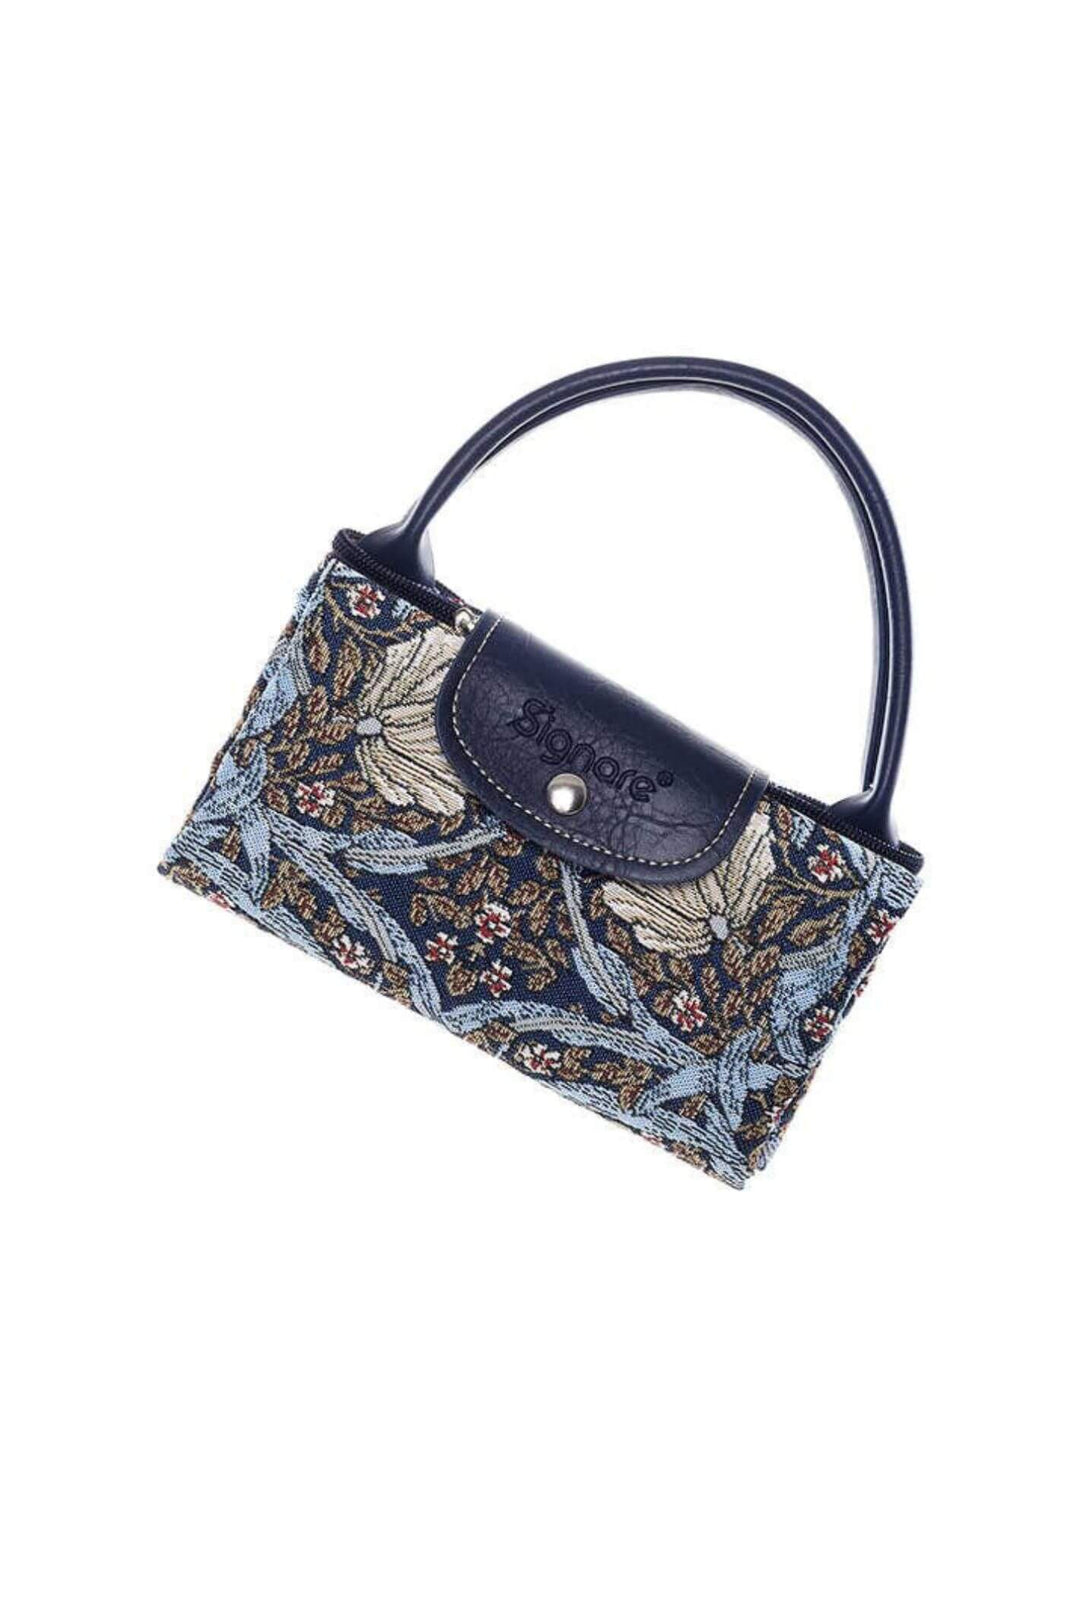 William Morris Pimpernel and Thyme Blue Le Pliage Folding Tote Bag